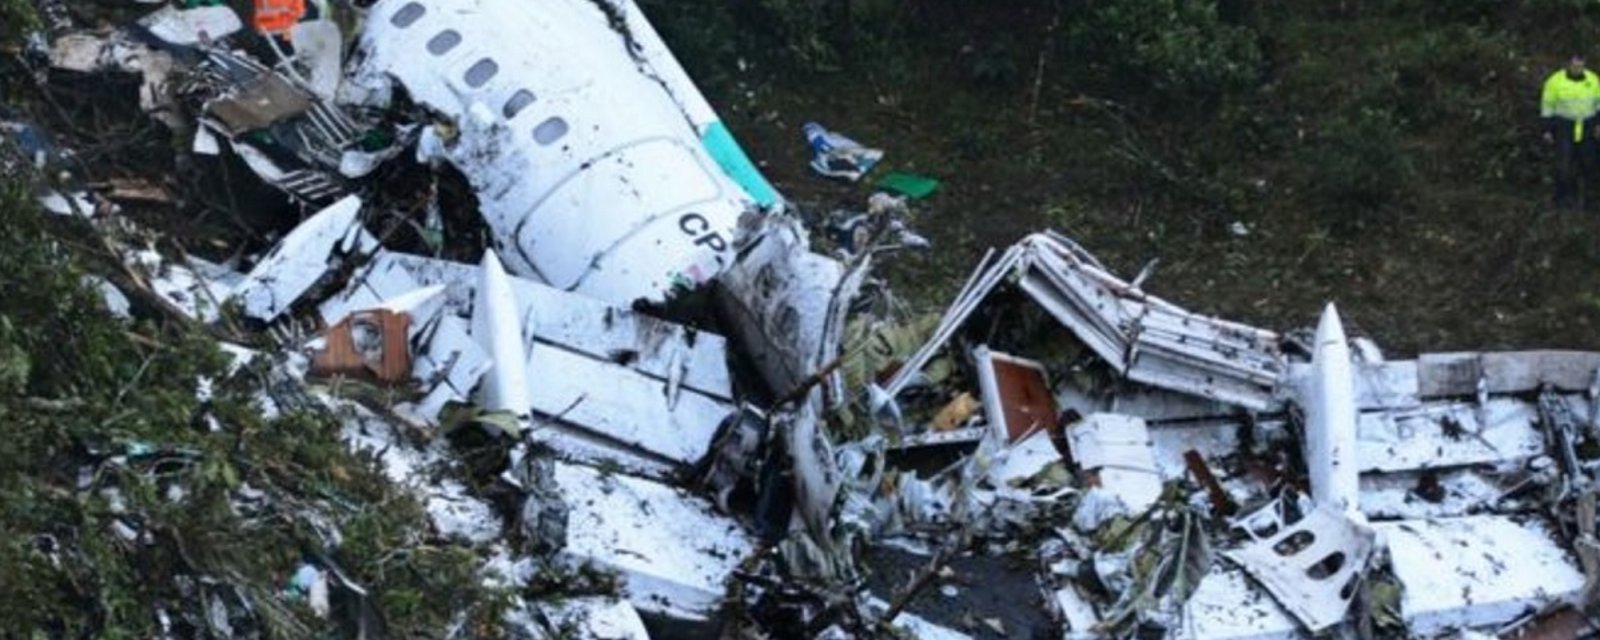 Tragedy from across the sports world  this morning as plane crash claims 75 lives.